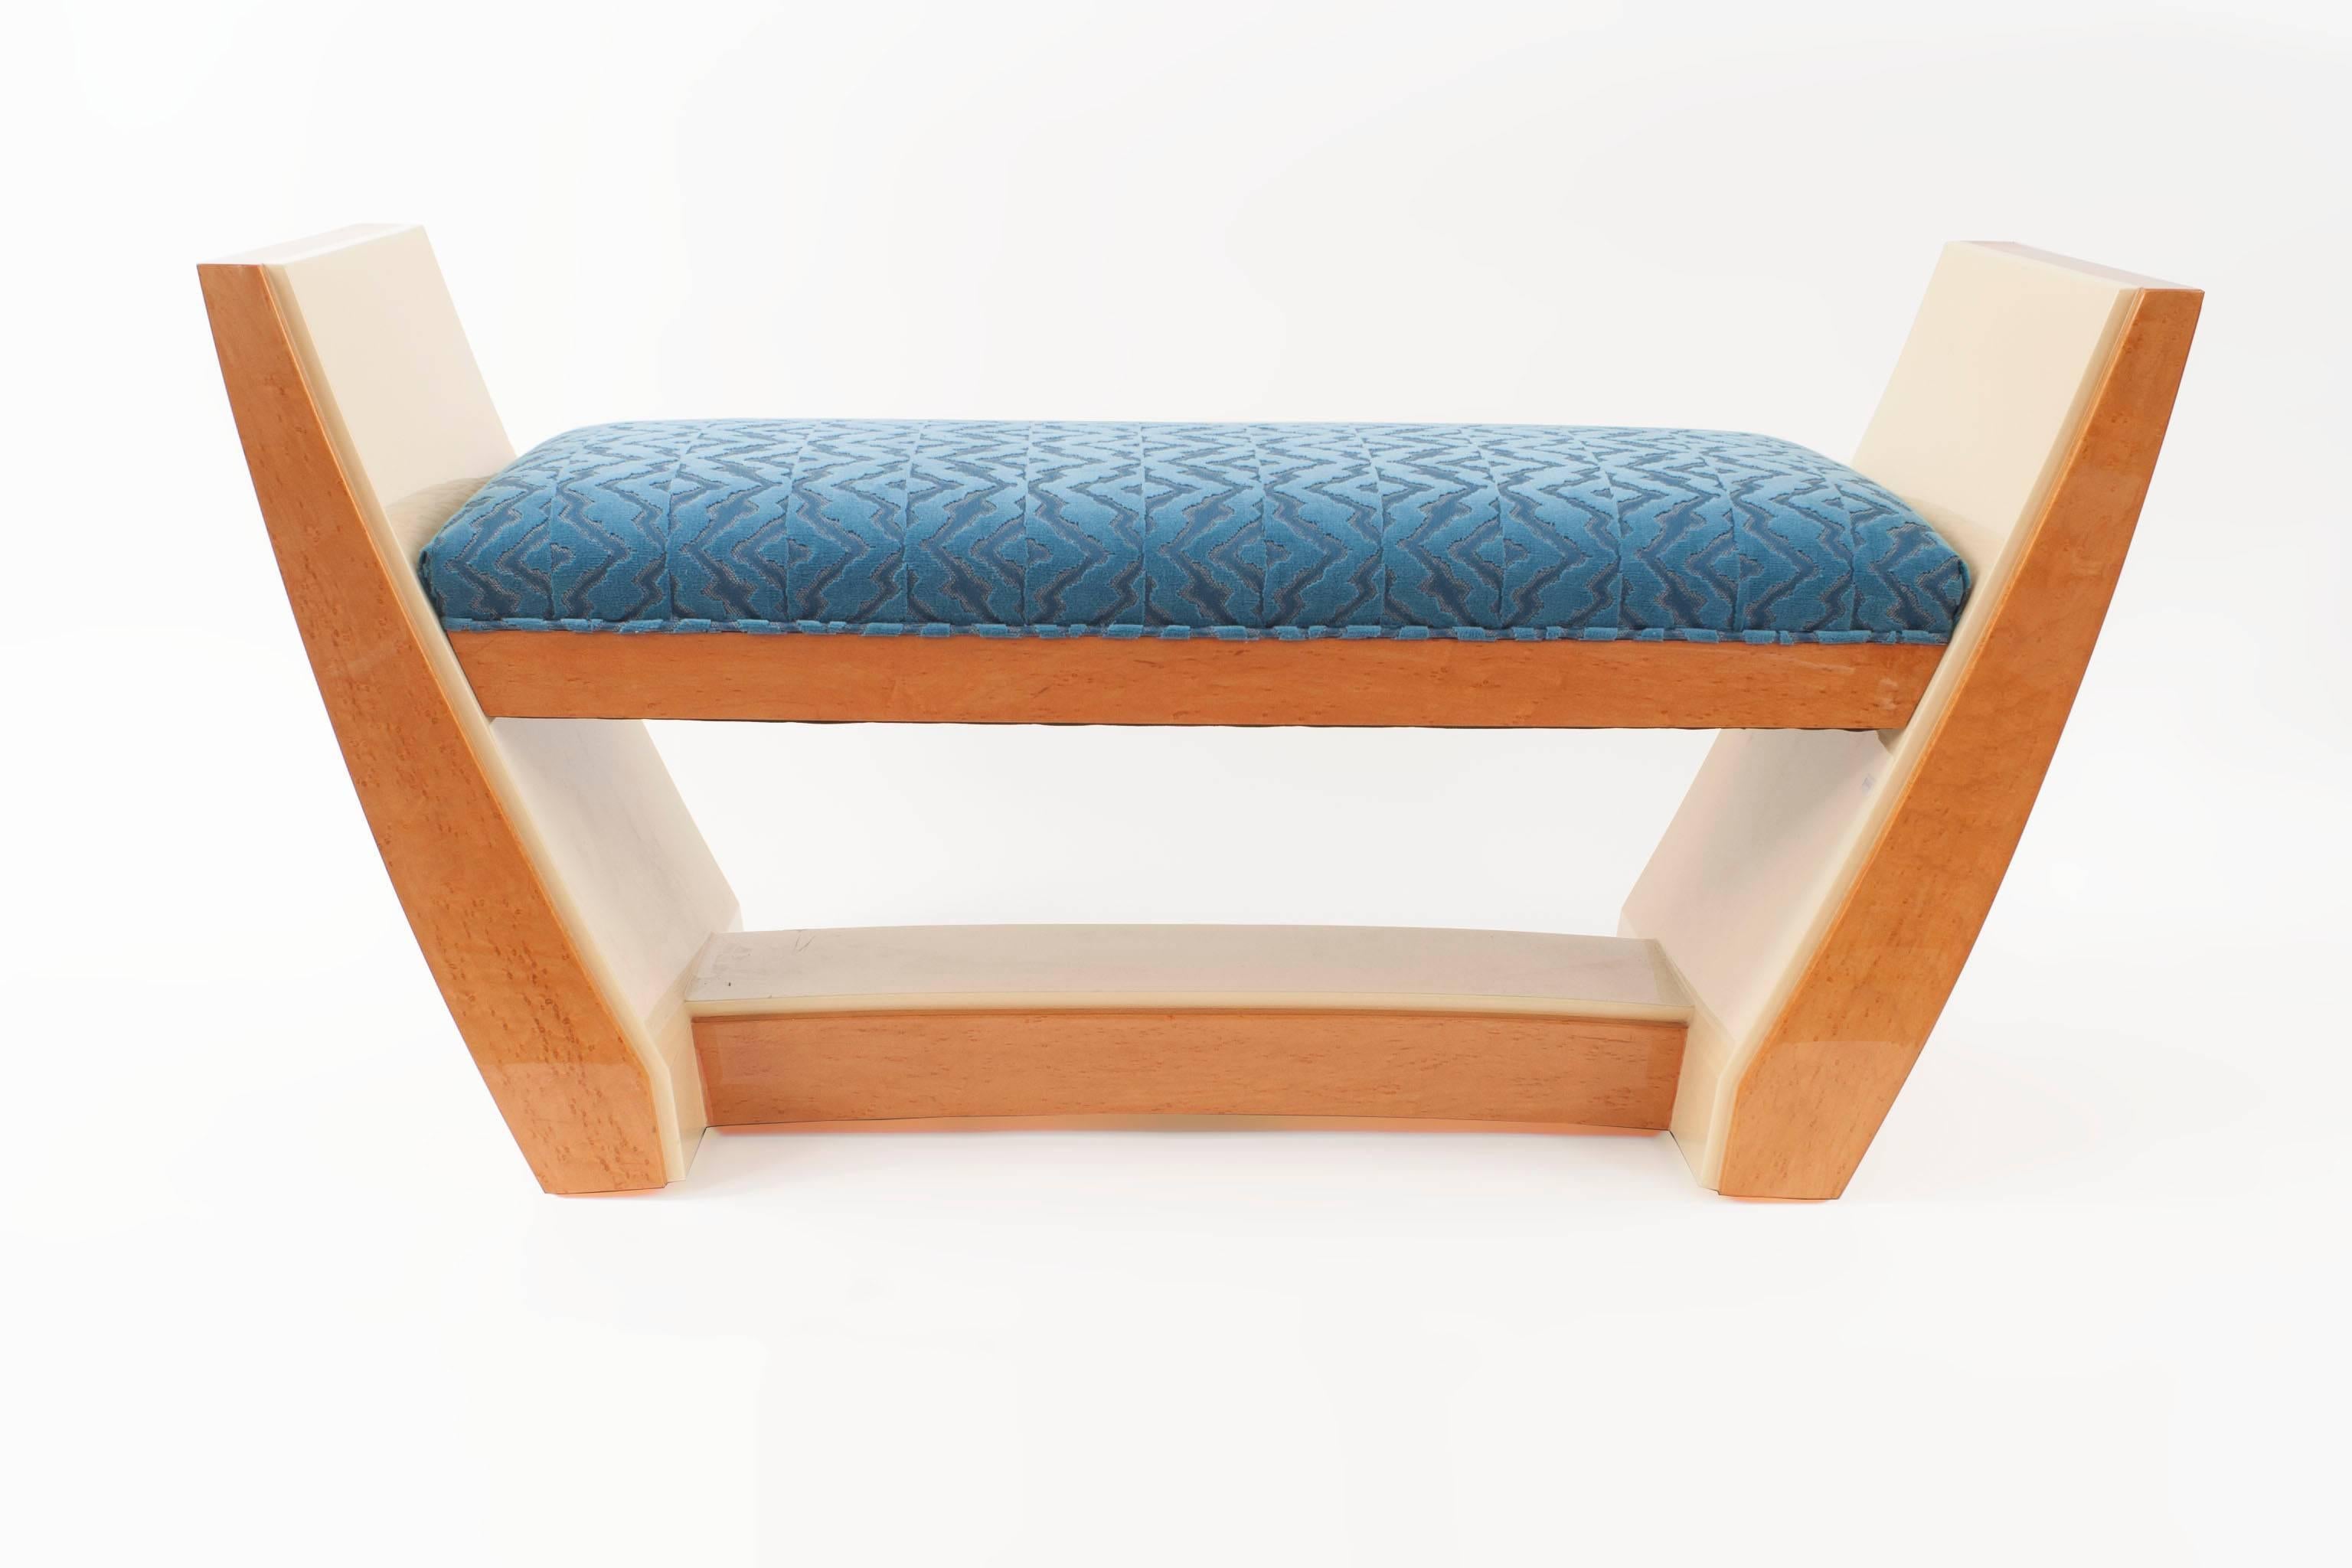 French Art Deco style custom maple & sycamore wood bench with flared side arms and blue upholstered seat with a slight arch design stretcher (CAN BE CUSTOMIZED)
